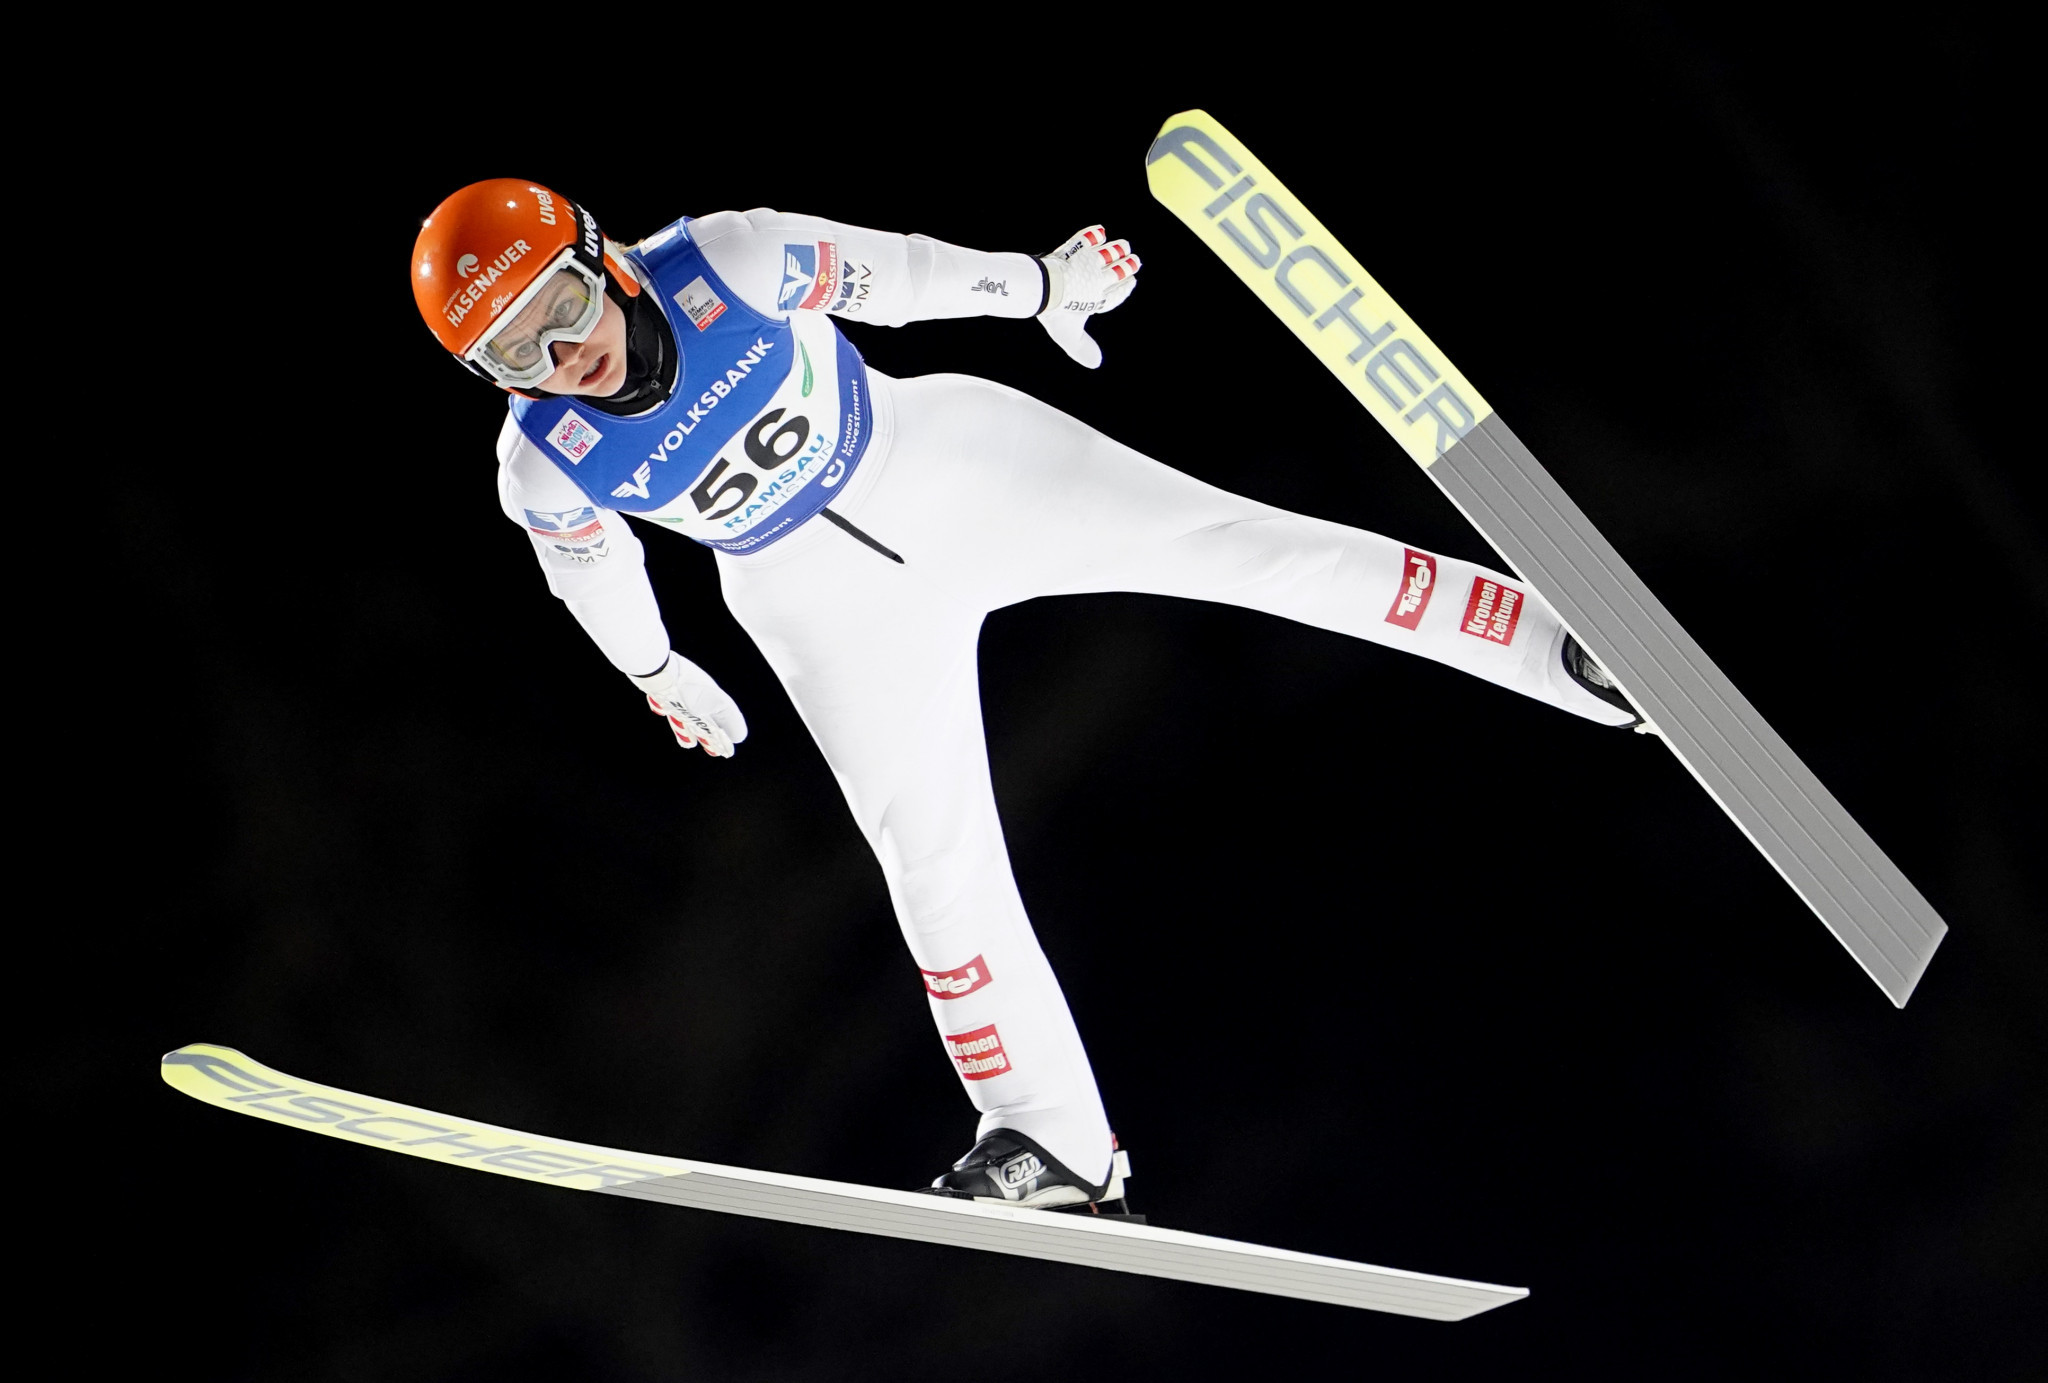 Kramer victorious again at Titisee-Neustadt Ski Jumping World Cup